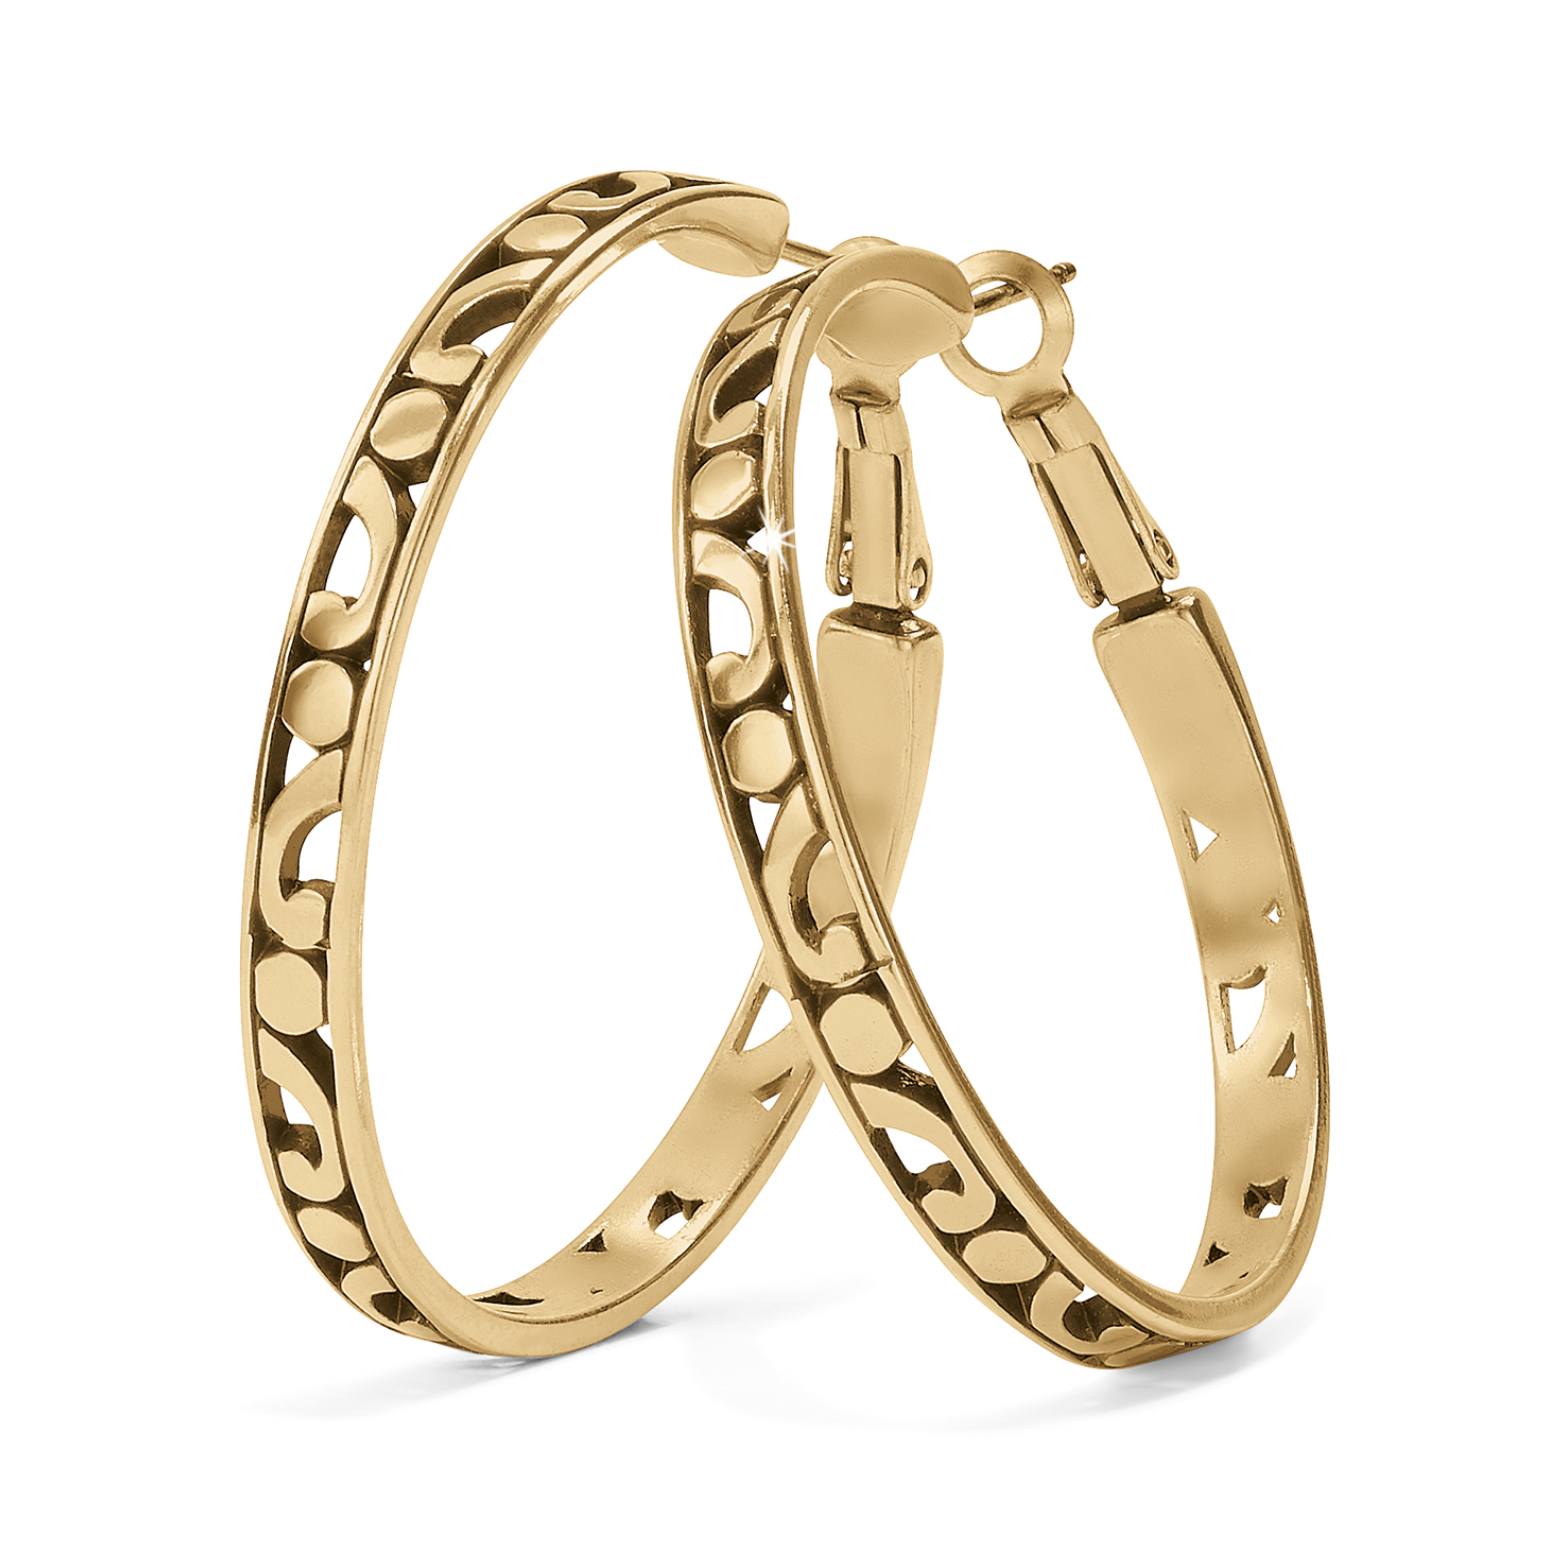 BRIGHTON CONTEMPO GOLD LARGE HOOP EARRINGS